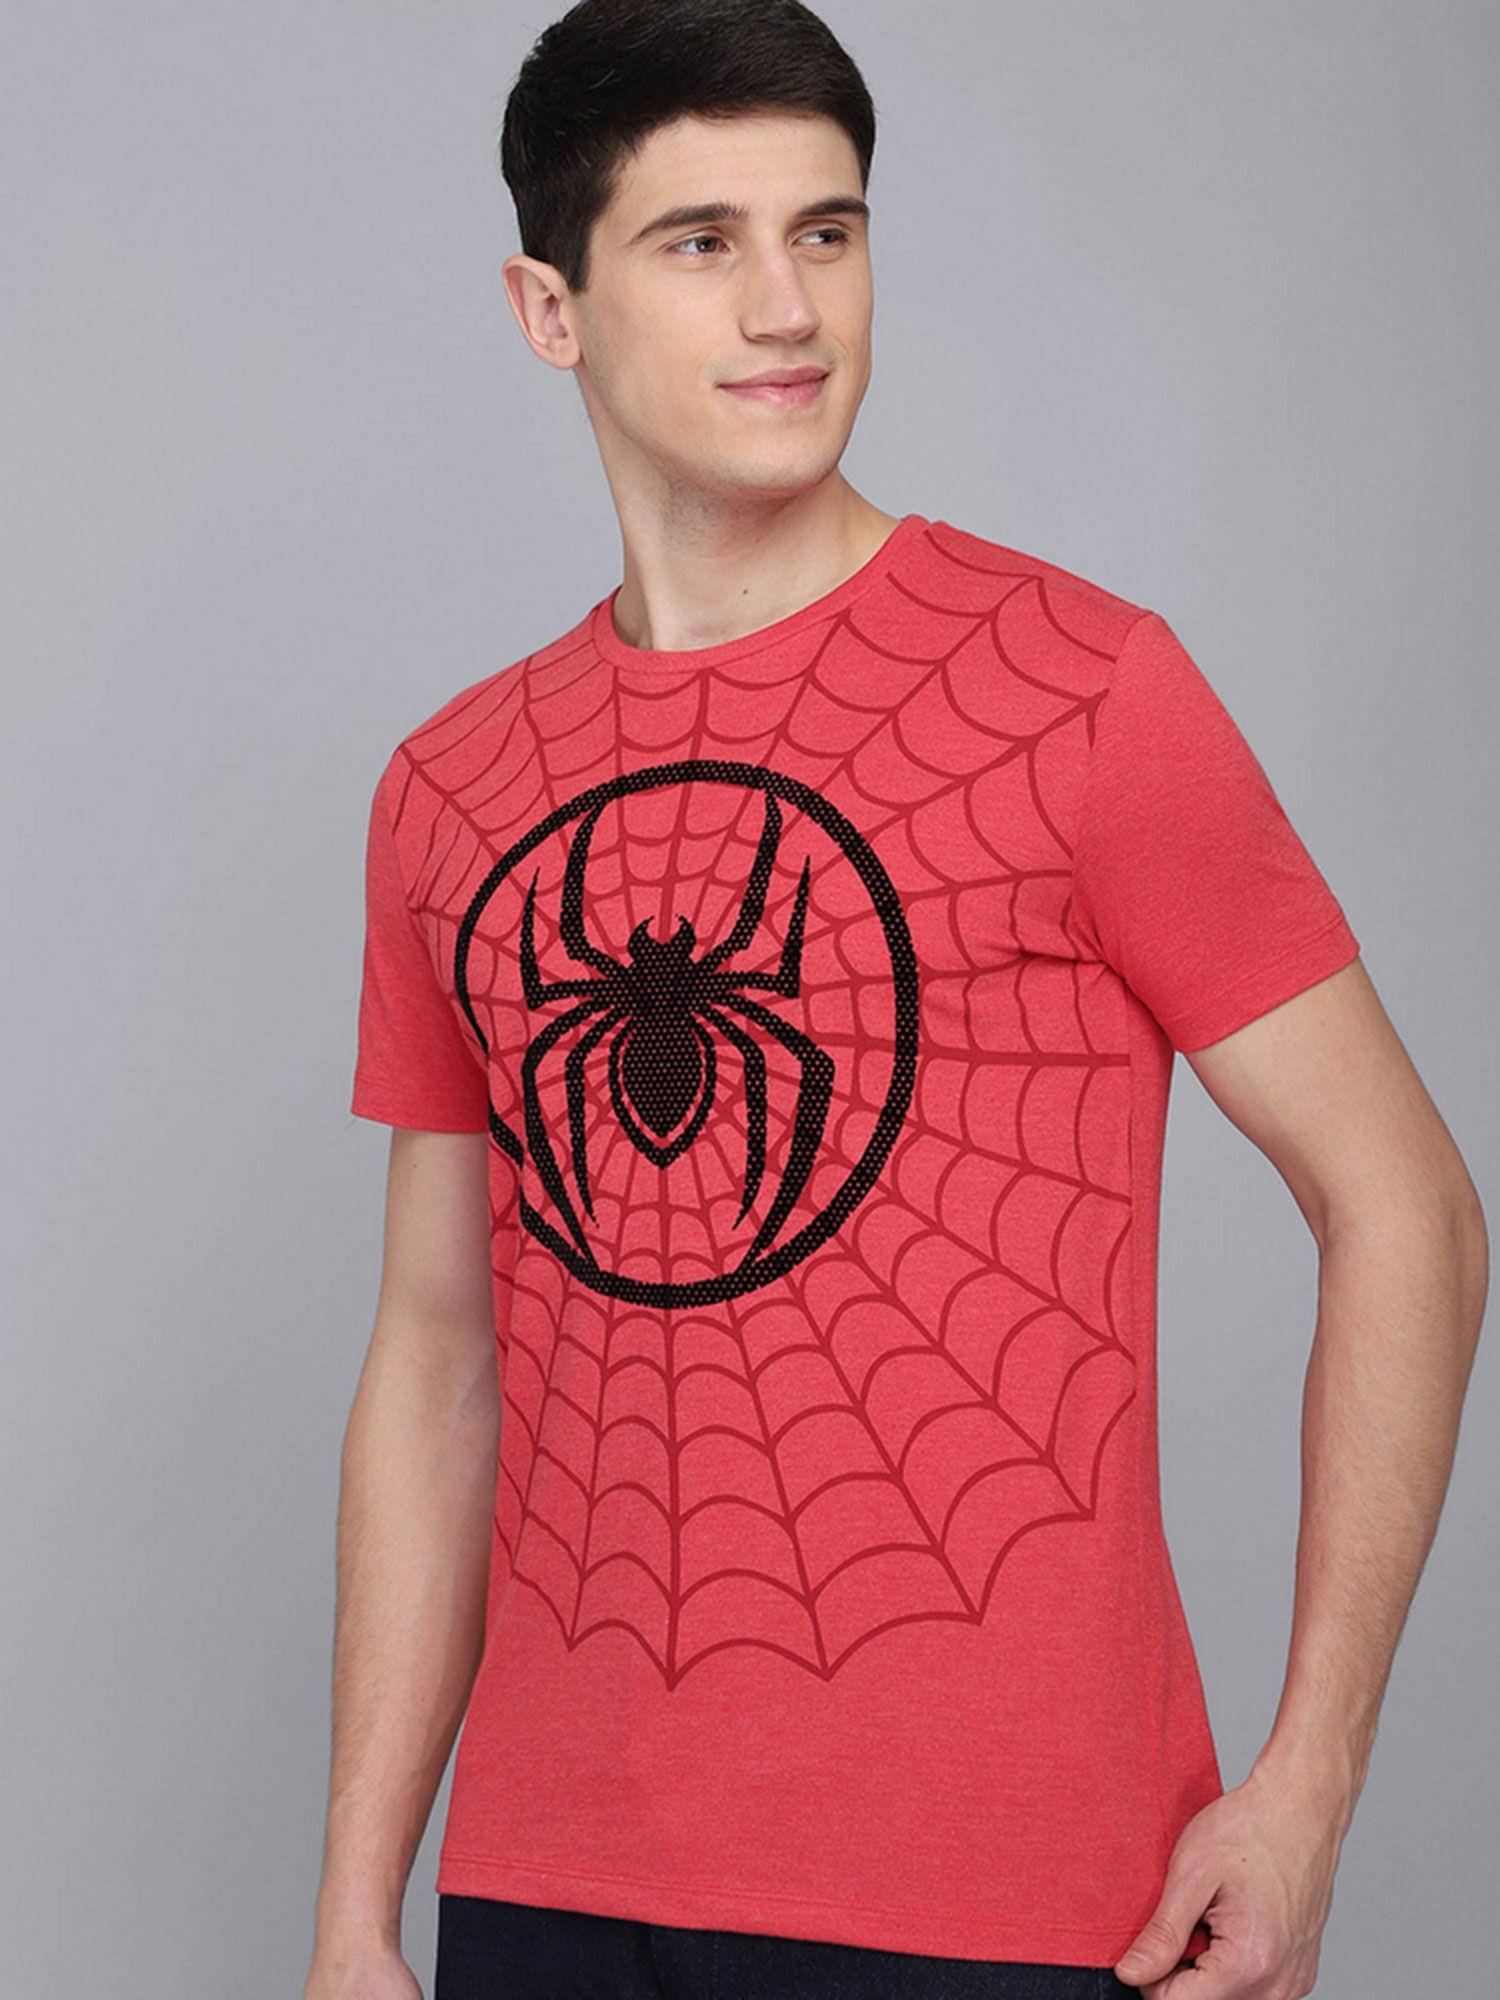 spiderman featured t-shirt for men